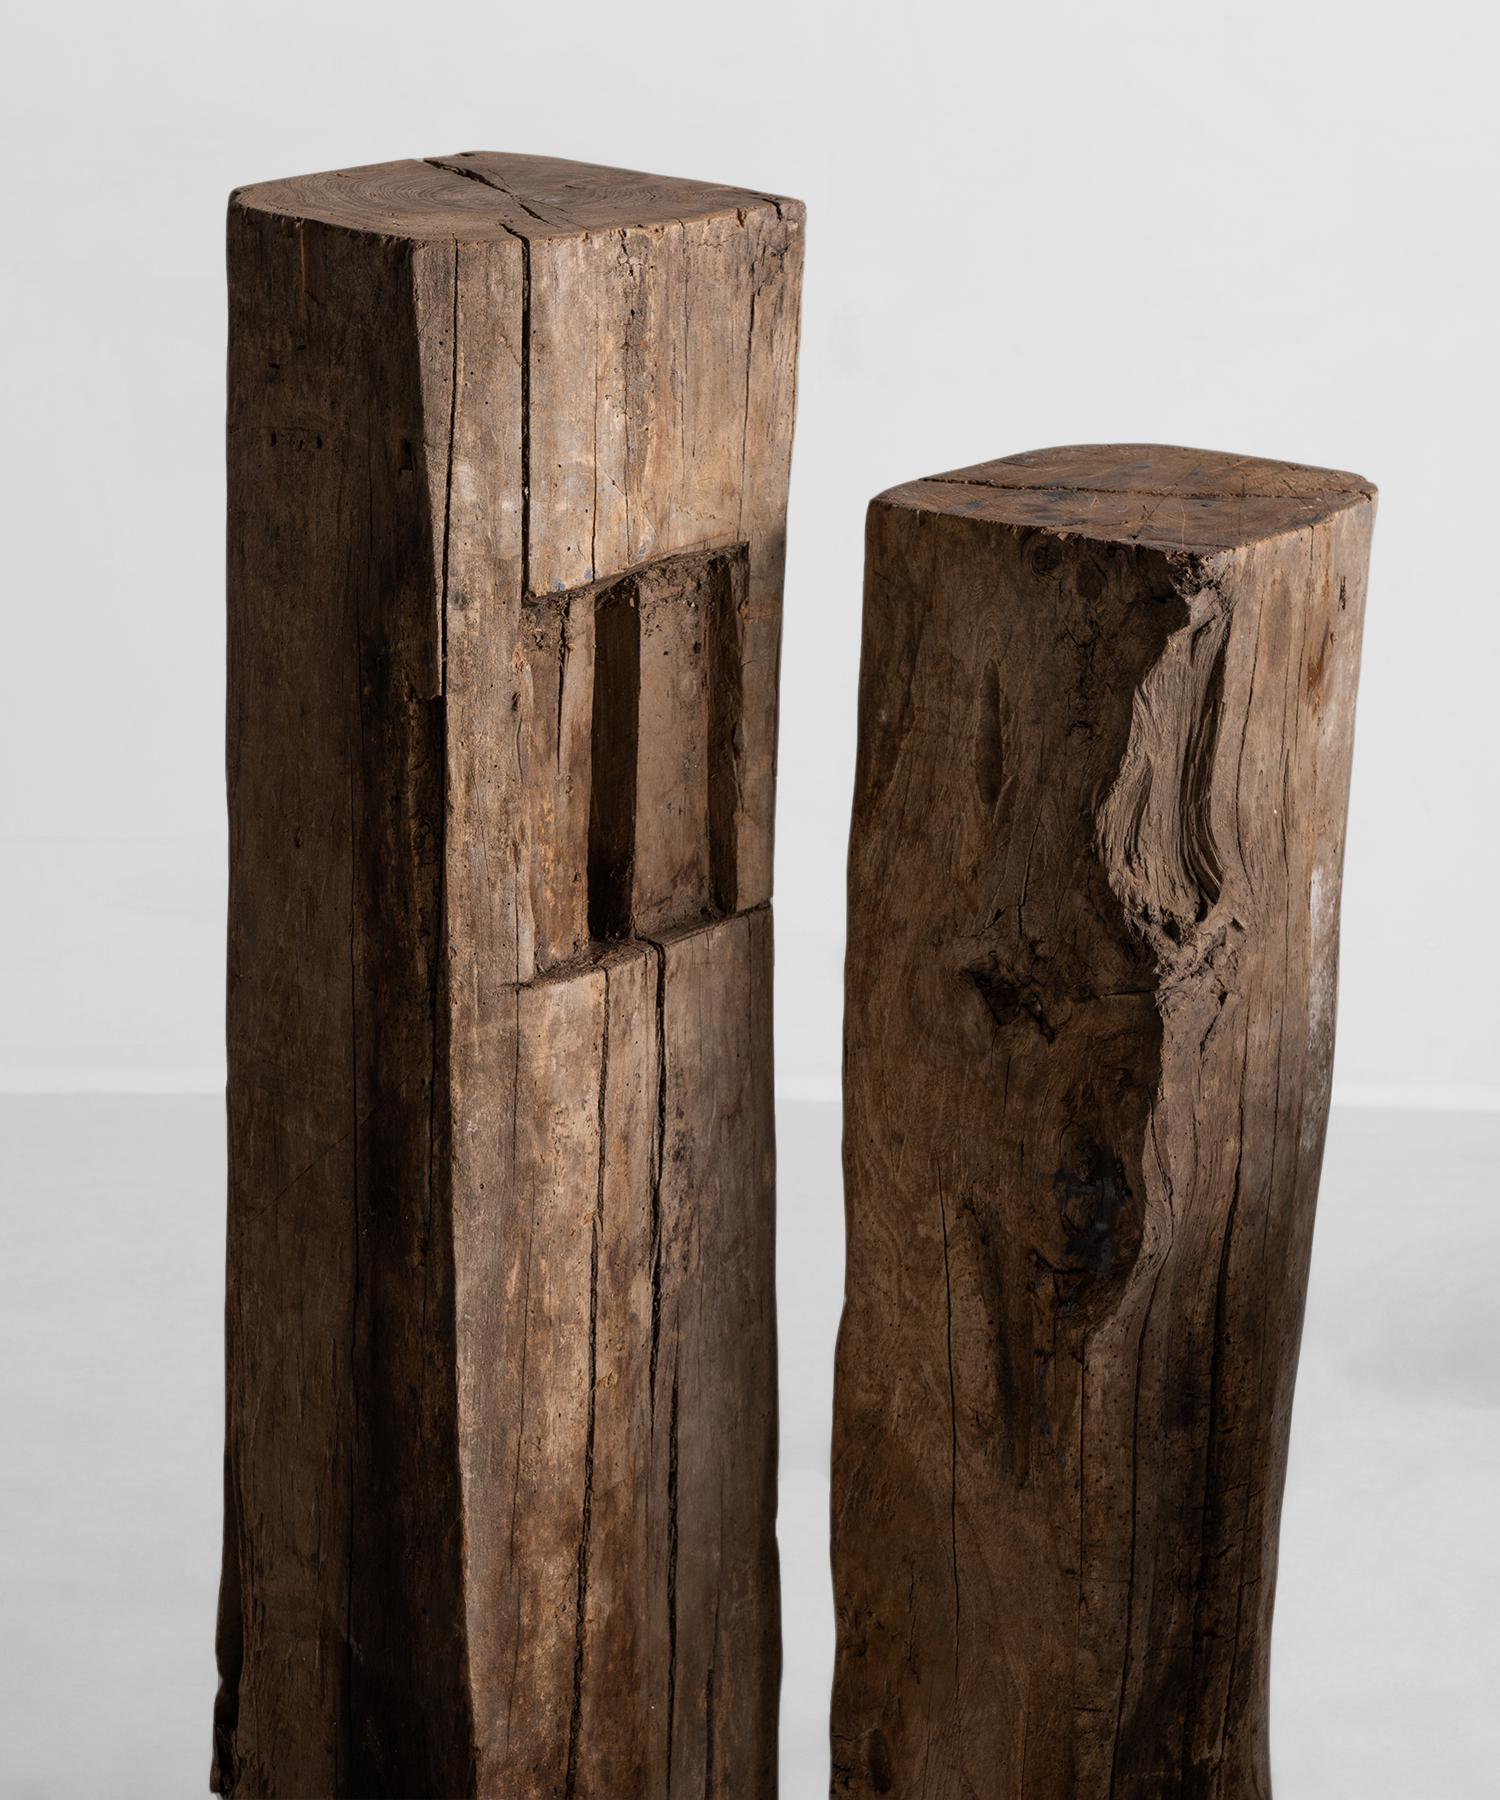 Large blocks of wood with varying patina.

Measures: 29